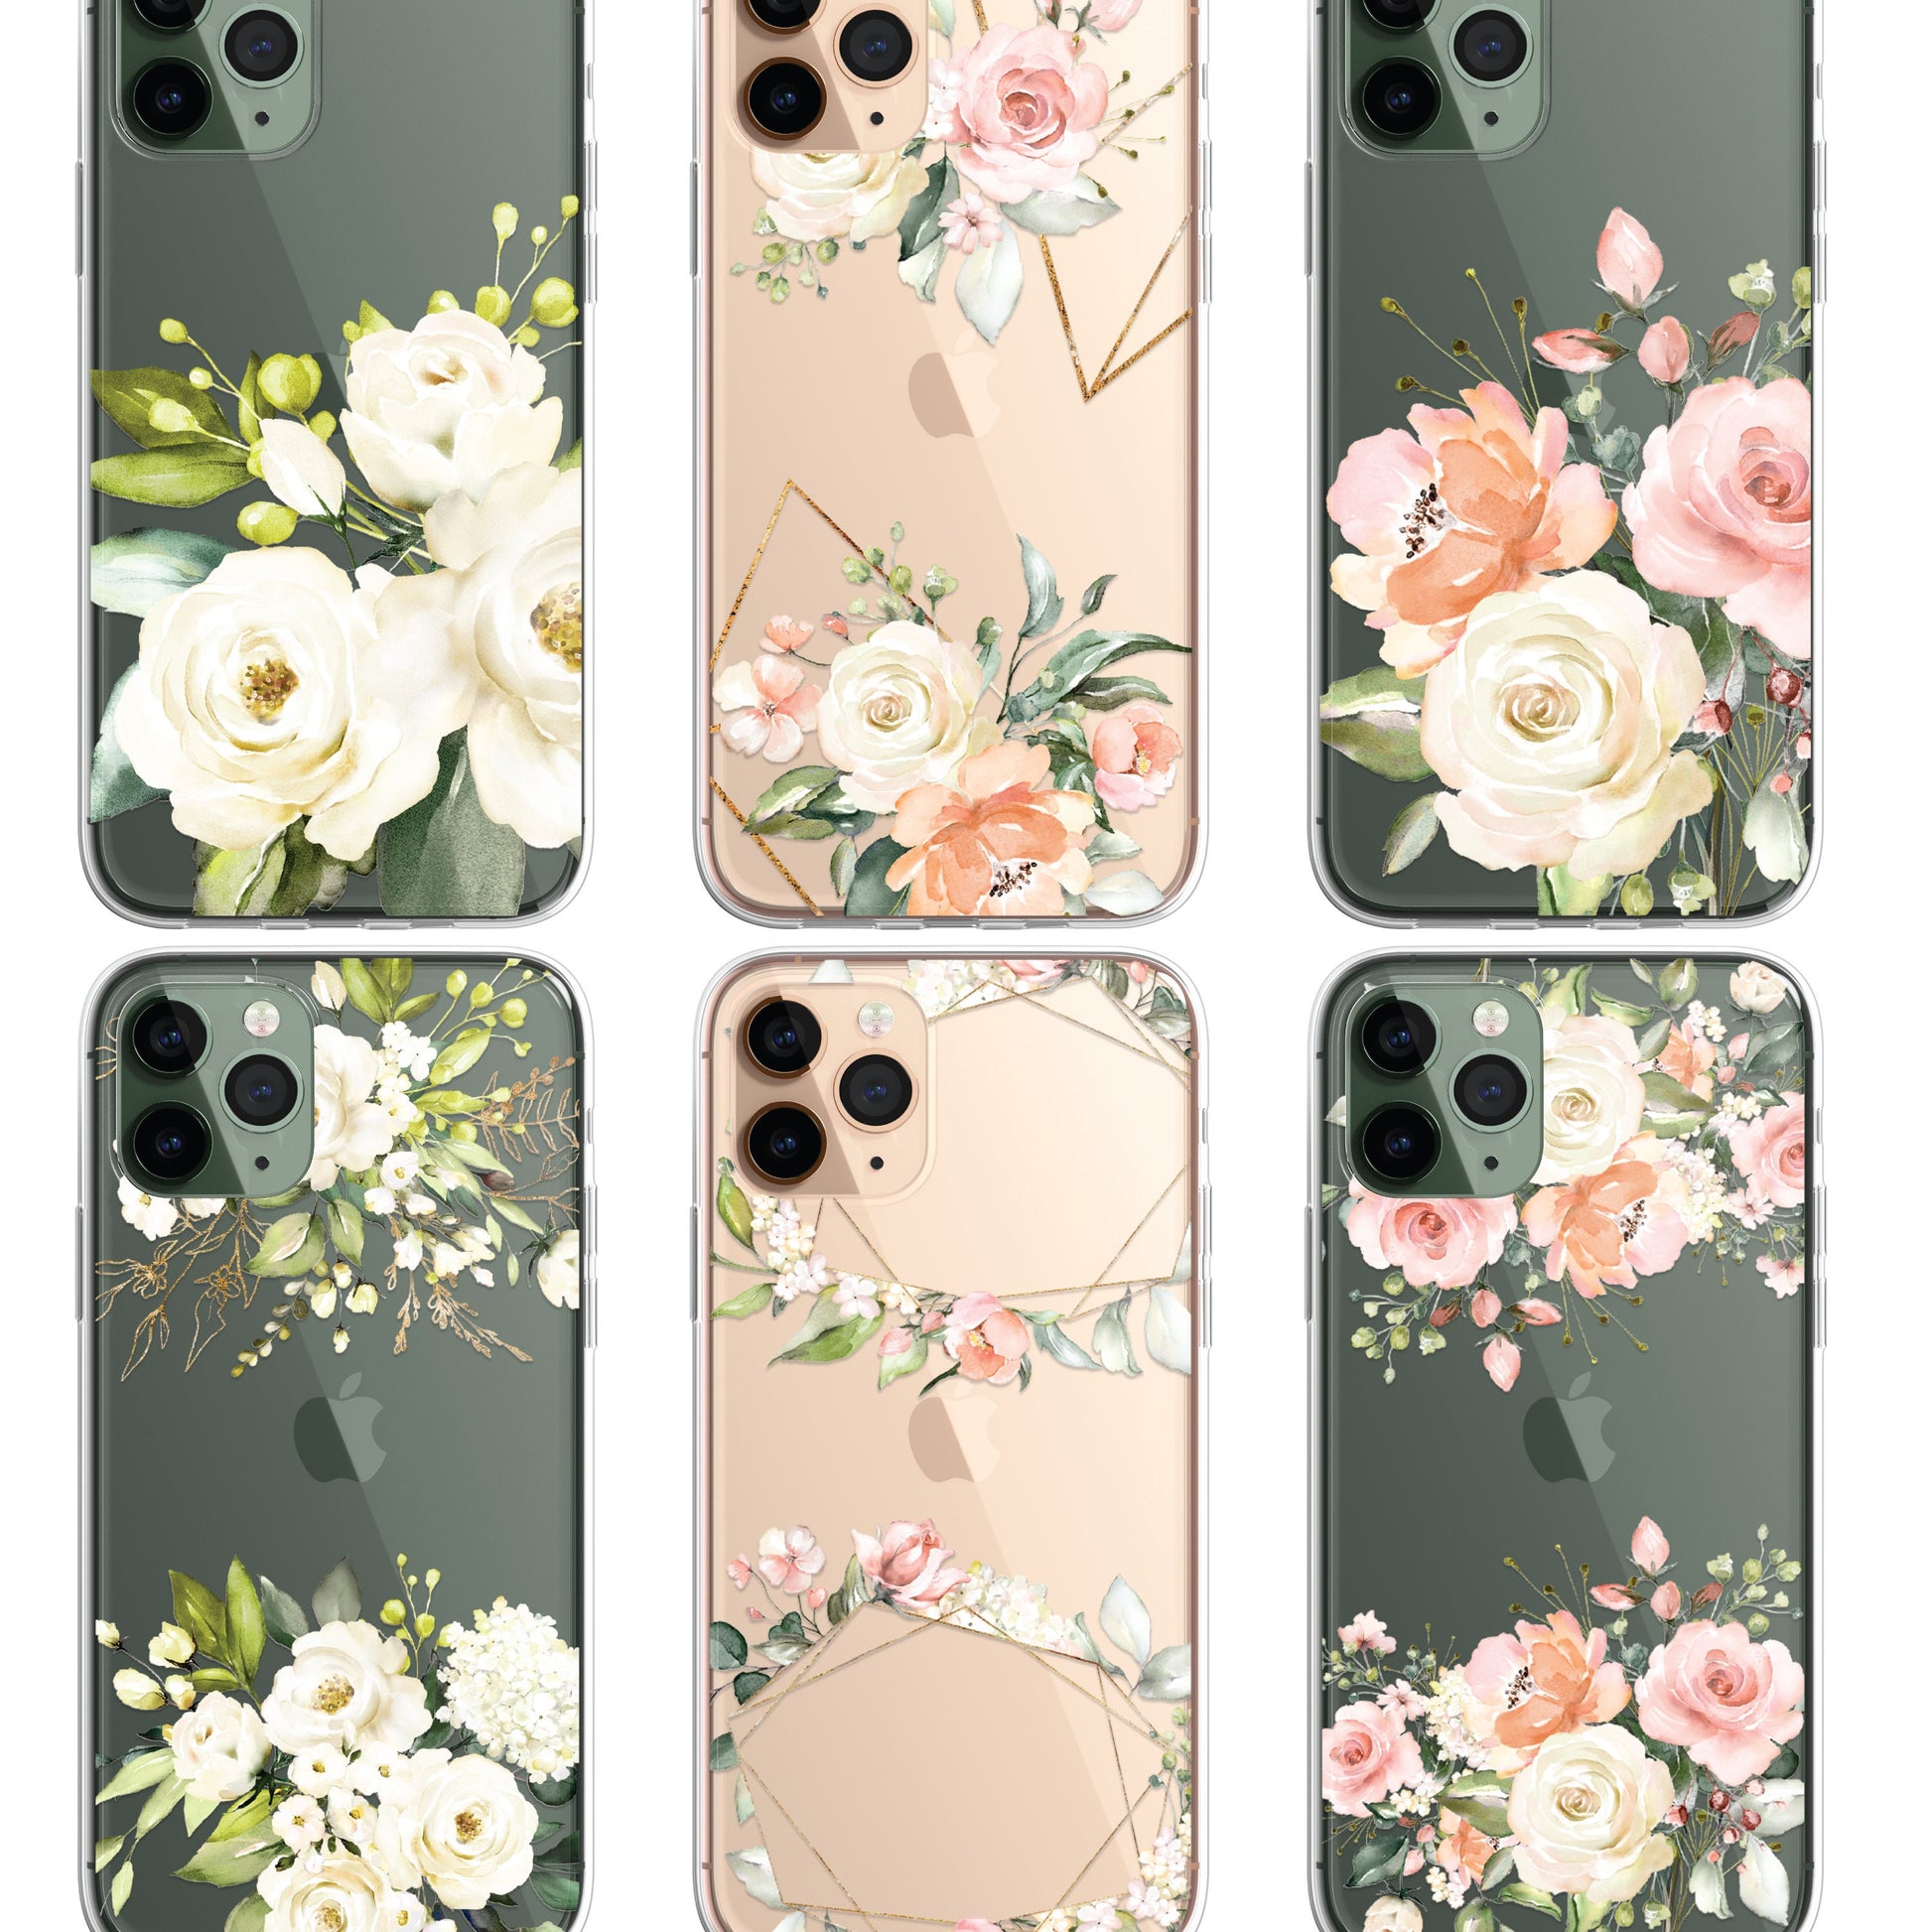 Silicone CLEAR Phone Case Cover Pretty Floral Flowers English Roses Vintage Carnations Gold iPhone 11 12 XR Max Plus Pro Samsung Galaxy